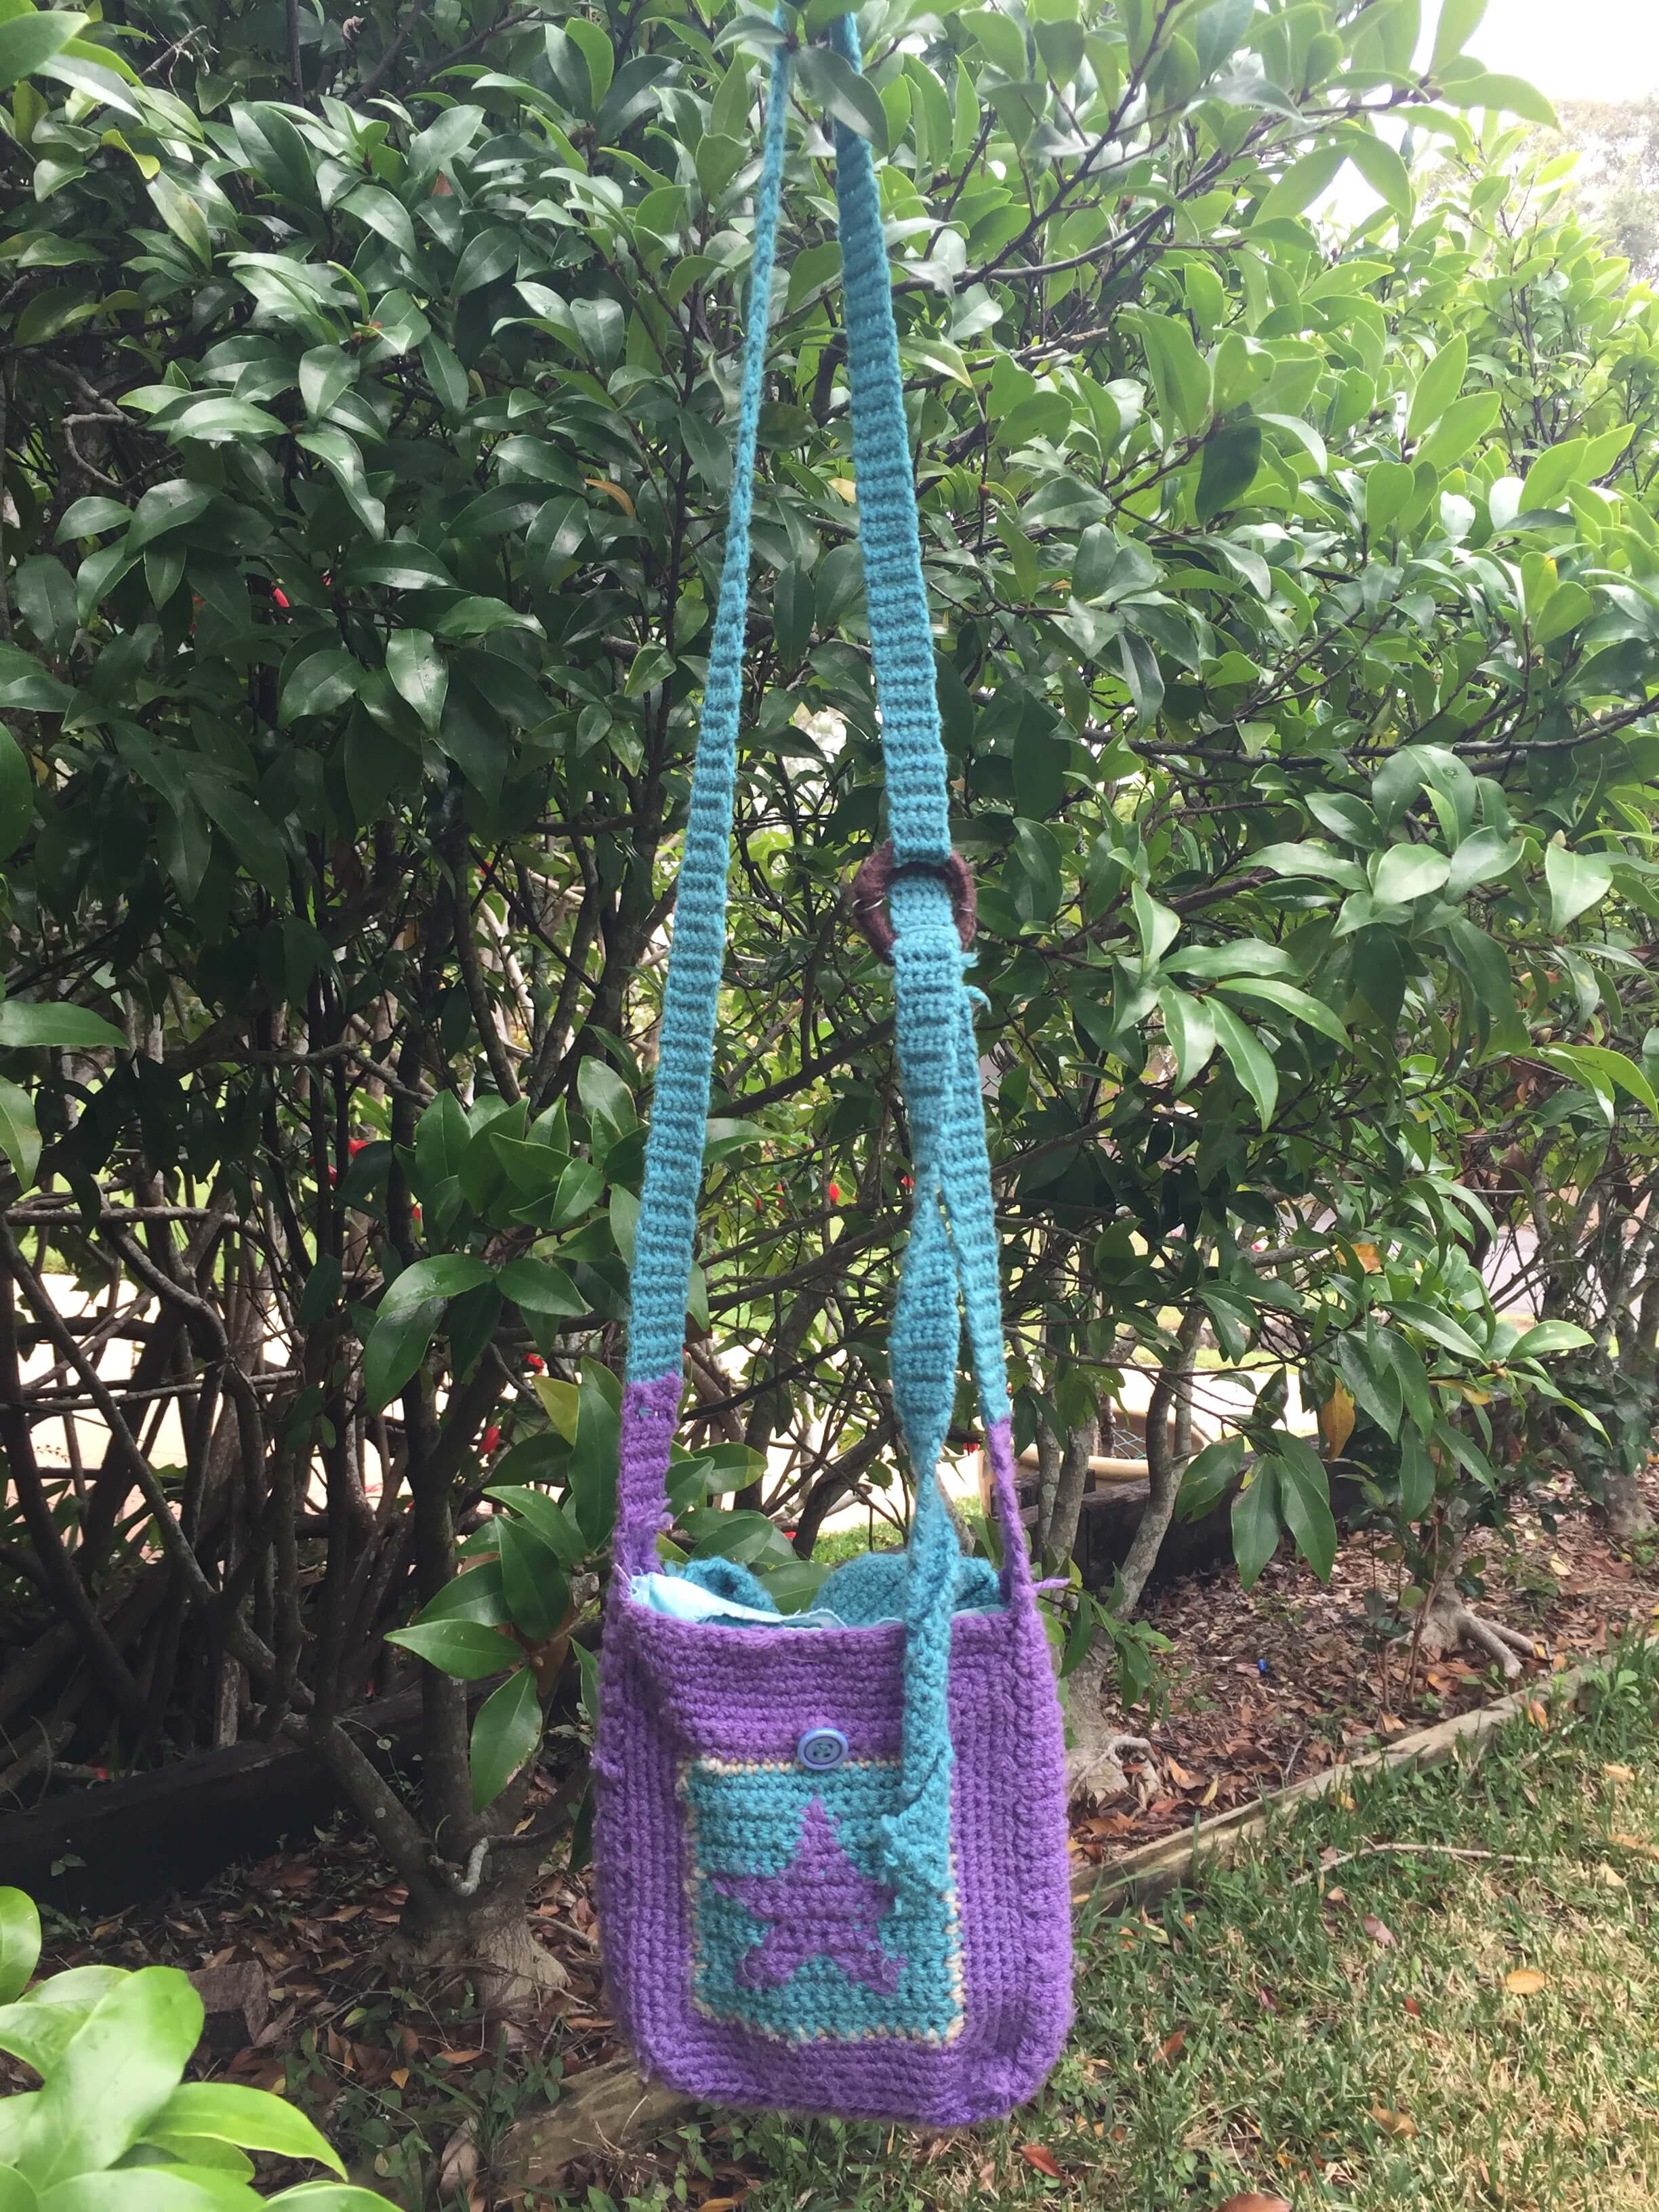 A purple and blue crocheted cross-body bag. The bag has a purple star motif on the front and a crocheted blue strap.